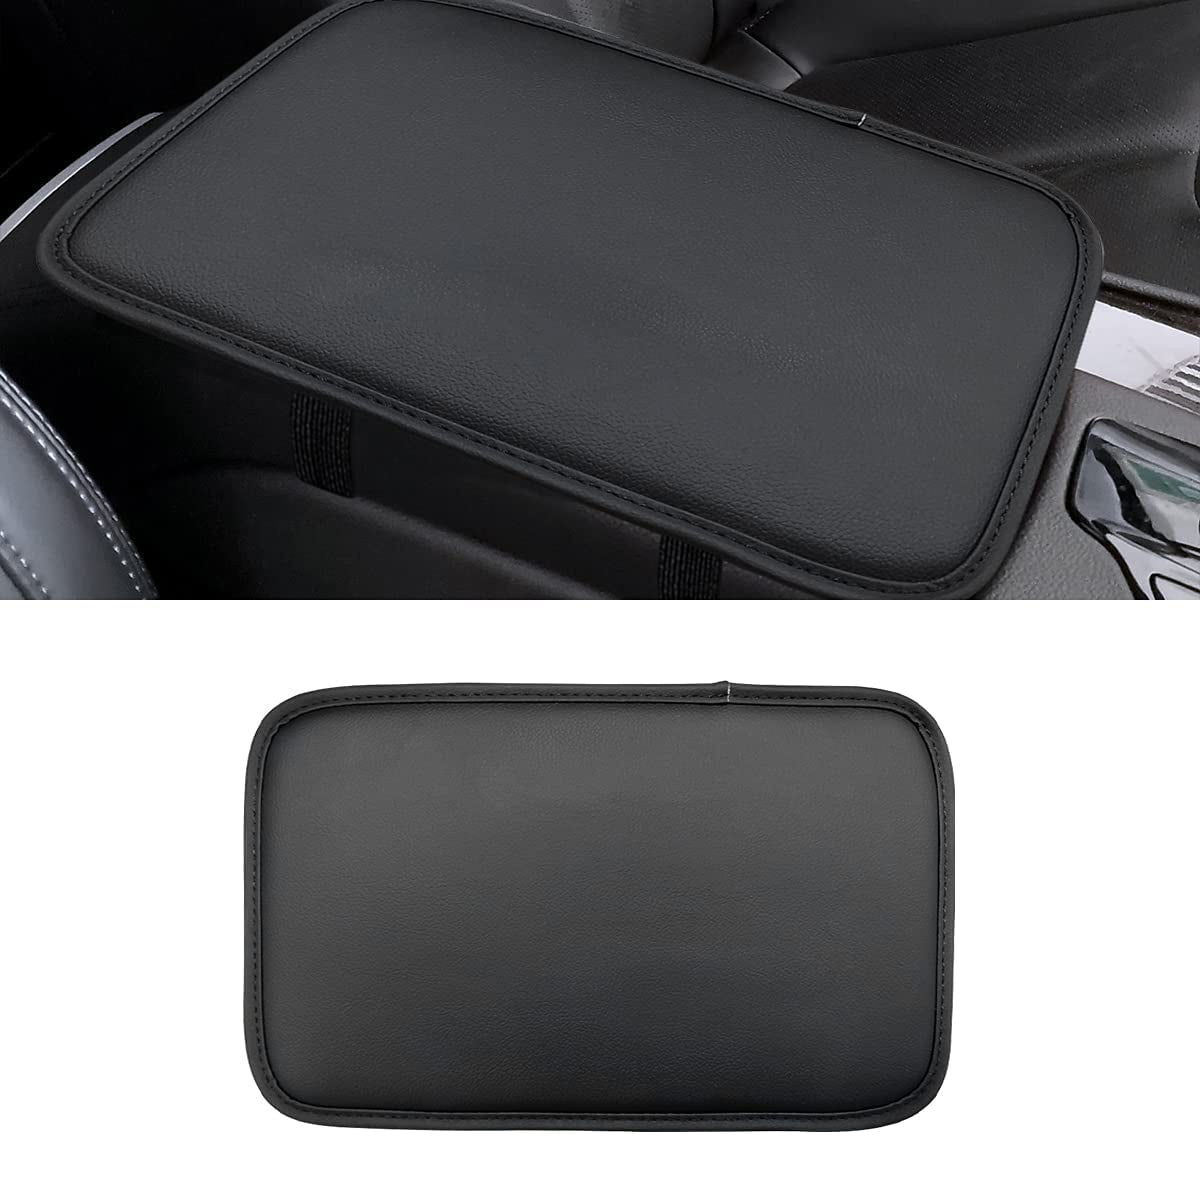 Leather Center Console Cushion Pad, Custom Fit For Your Cars, Waterproof Armrest Seat Box Cover Fit, Car Interior Protection Accessories, Car Accessories IN13991